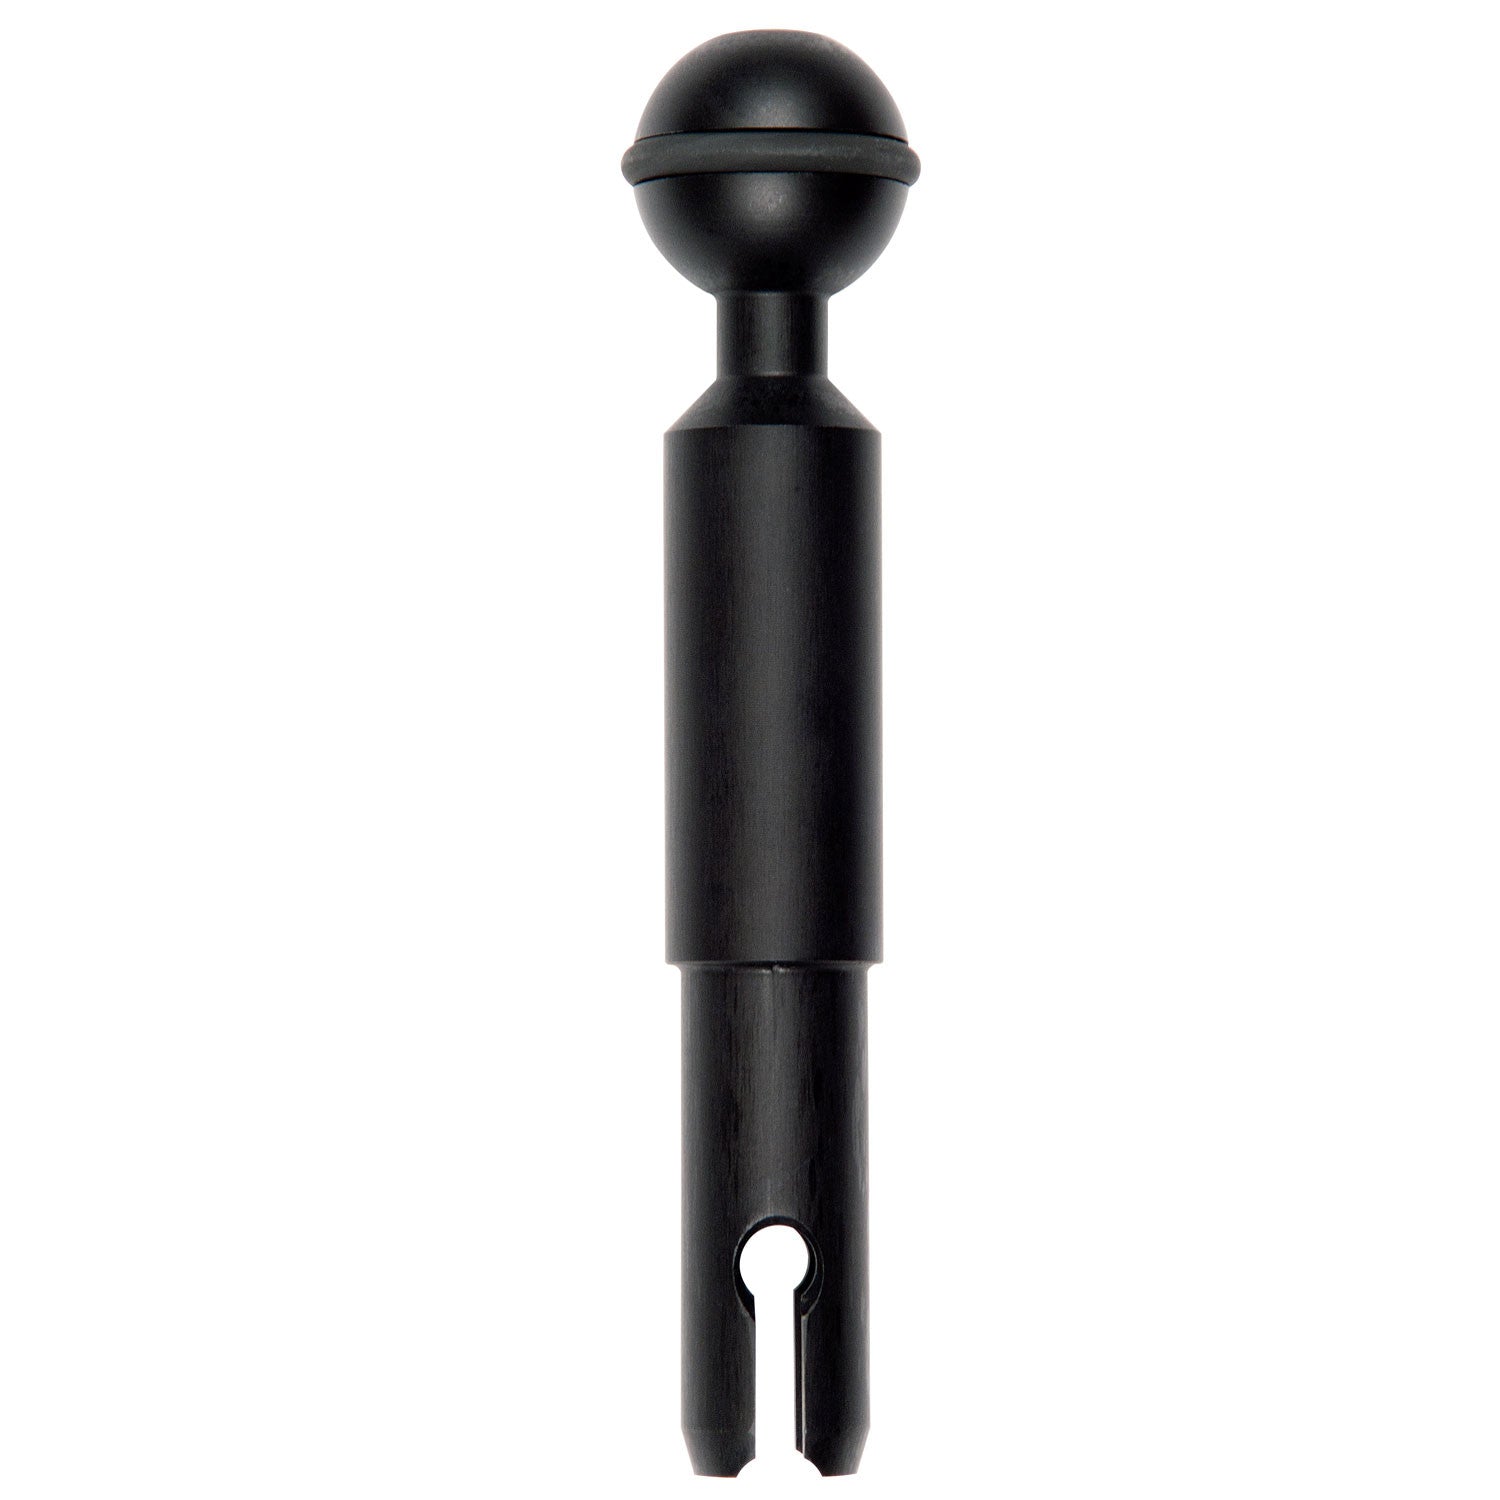 1-inch Ball with Extended Sensor Mount for Quick Release Handle